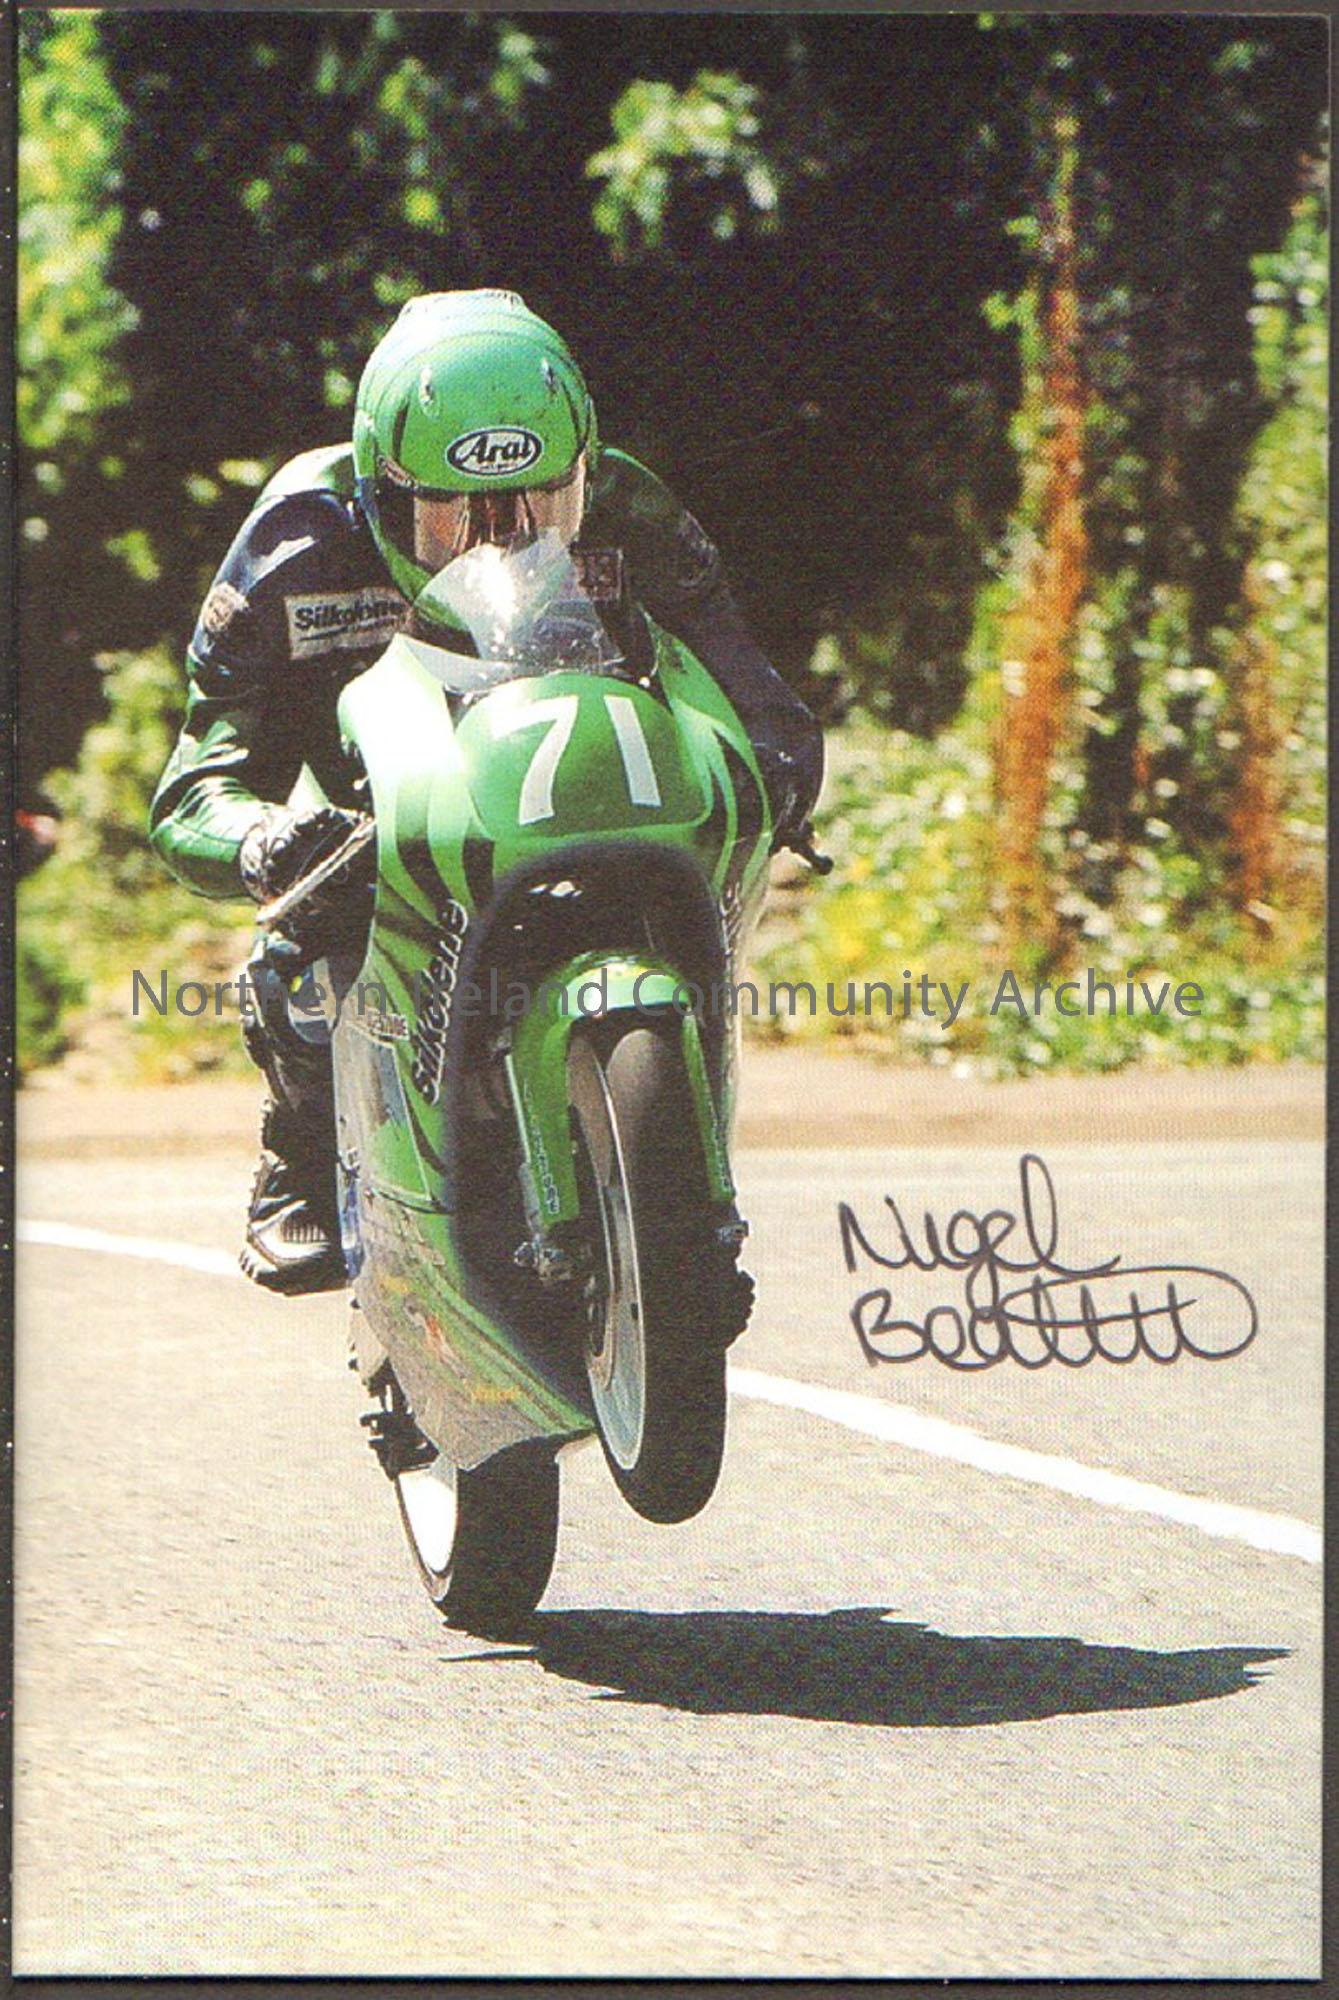 Signed photograph of Nigel Beattie riding a green motorbike with number 71 on the front wearing green and blue leathers and a green Arai helmet